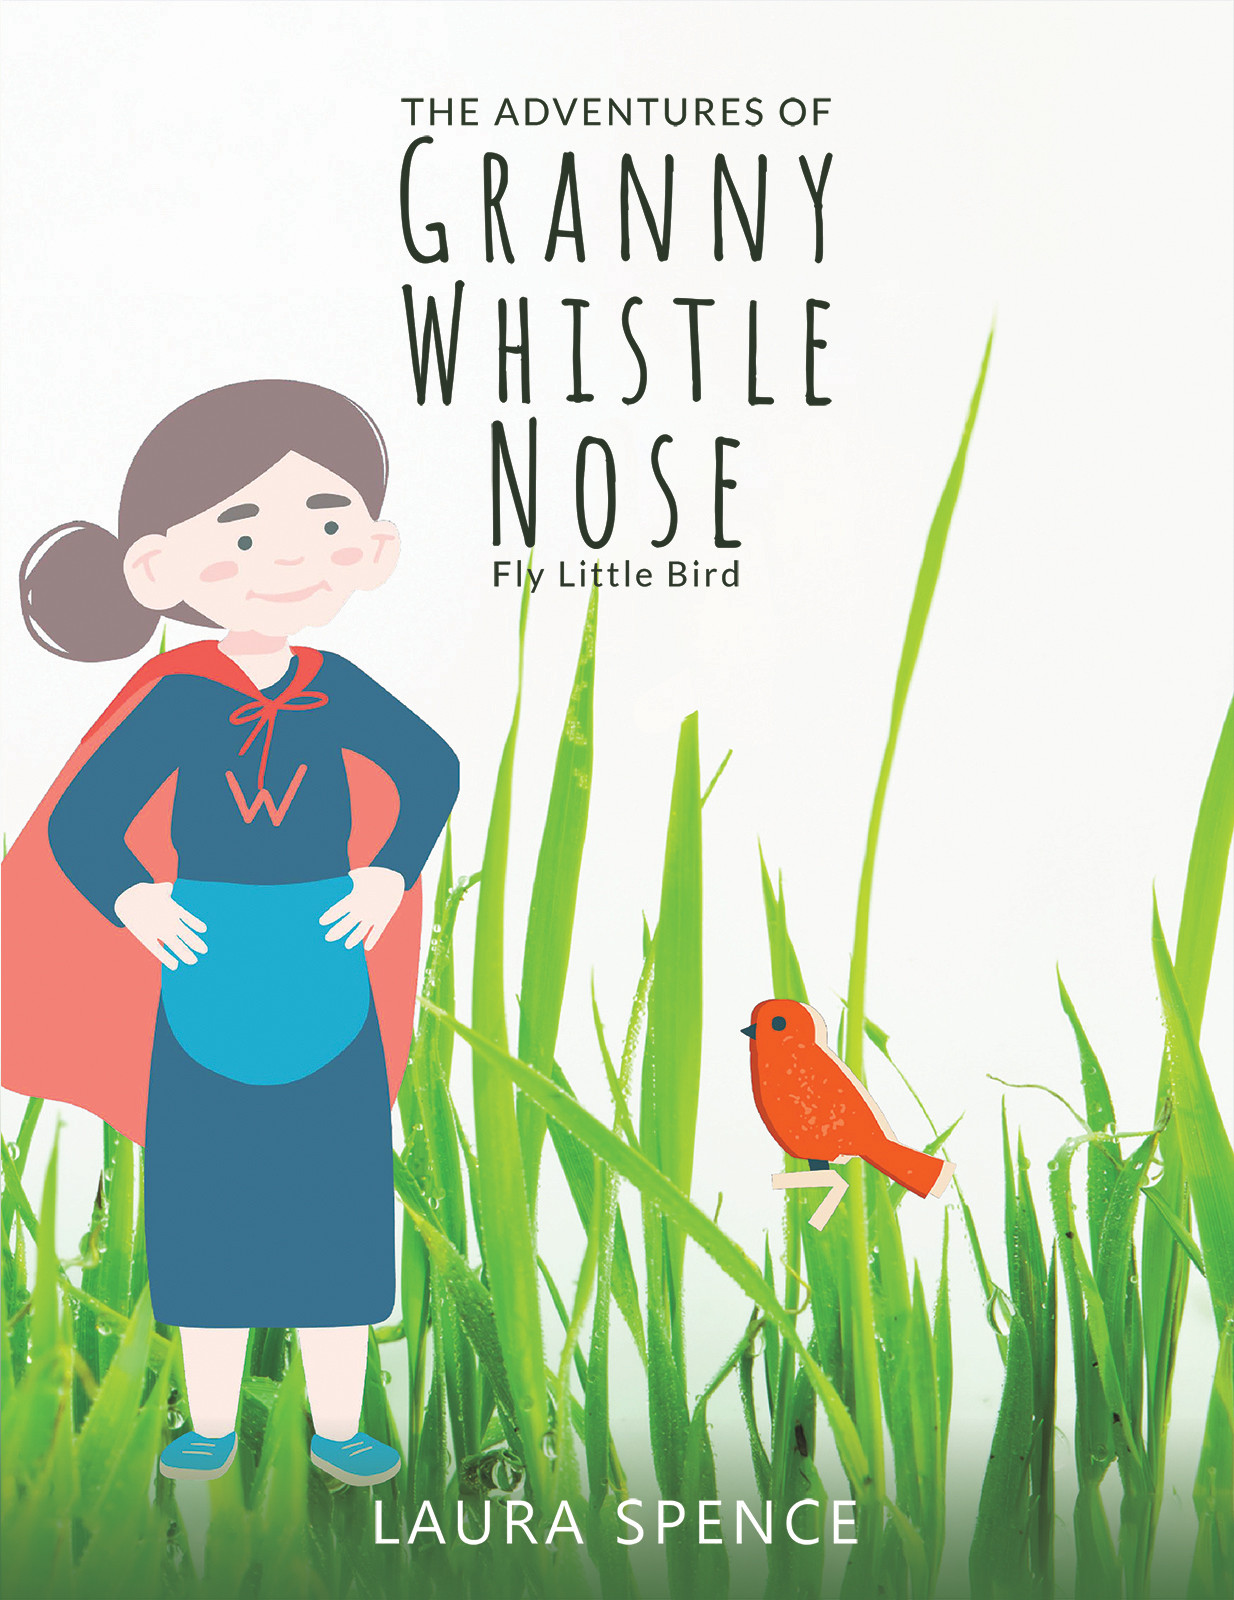 The Adventures of Granny Whistle Nose: Fly Little Bird